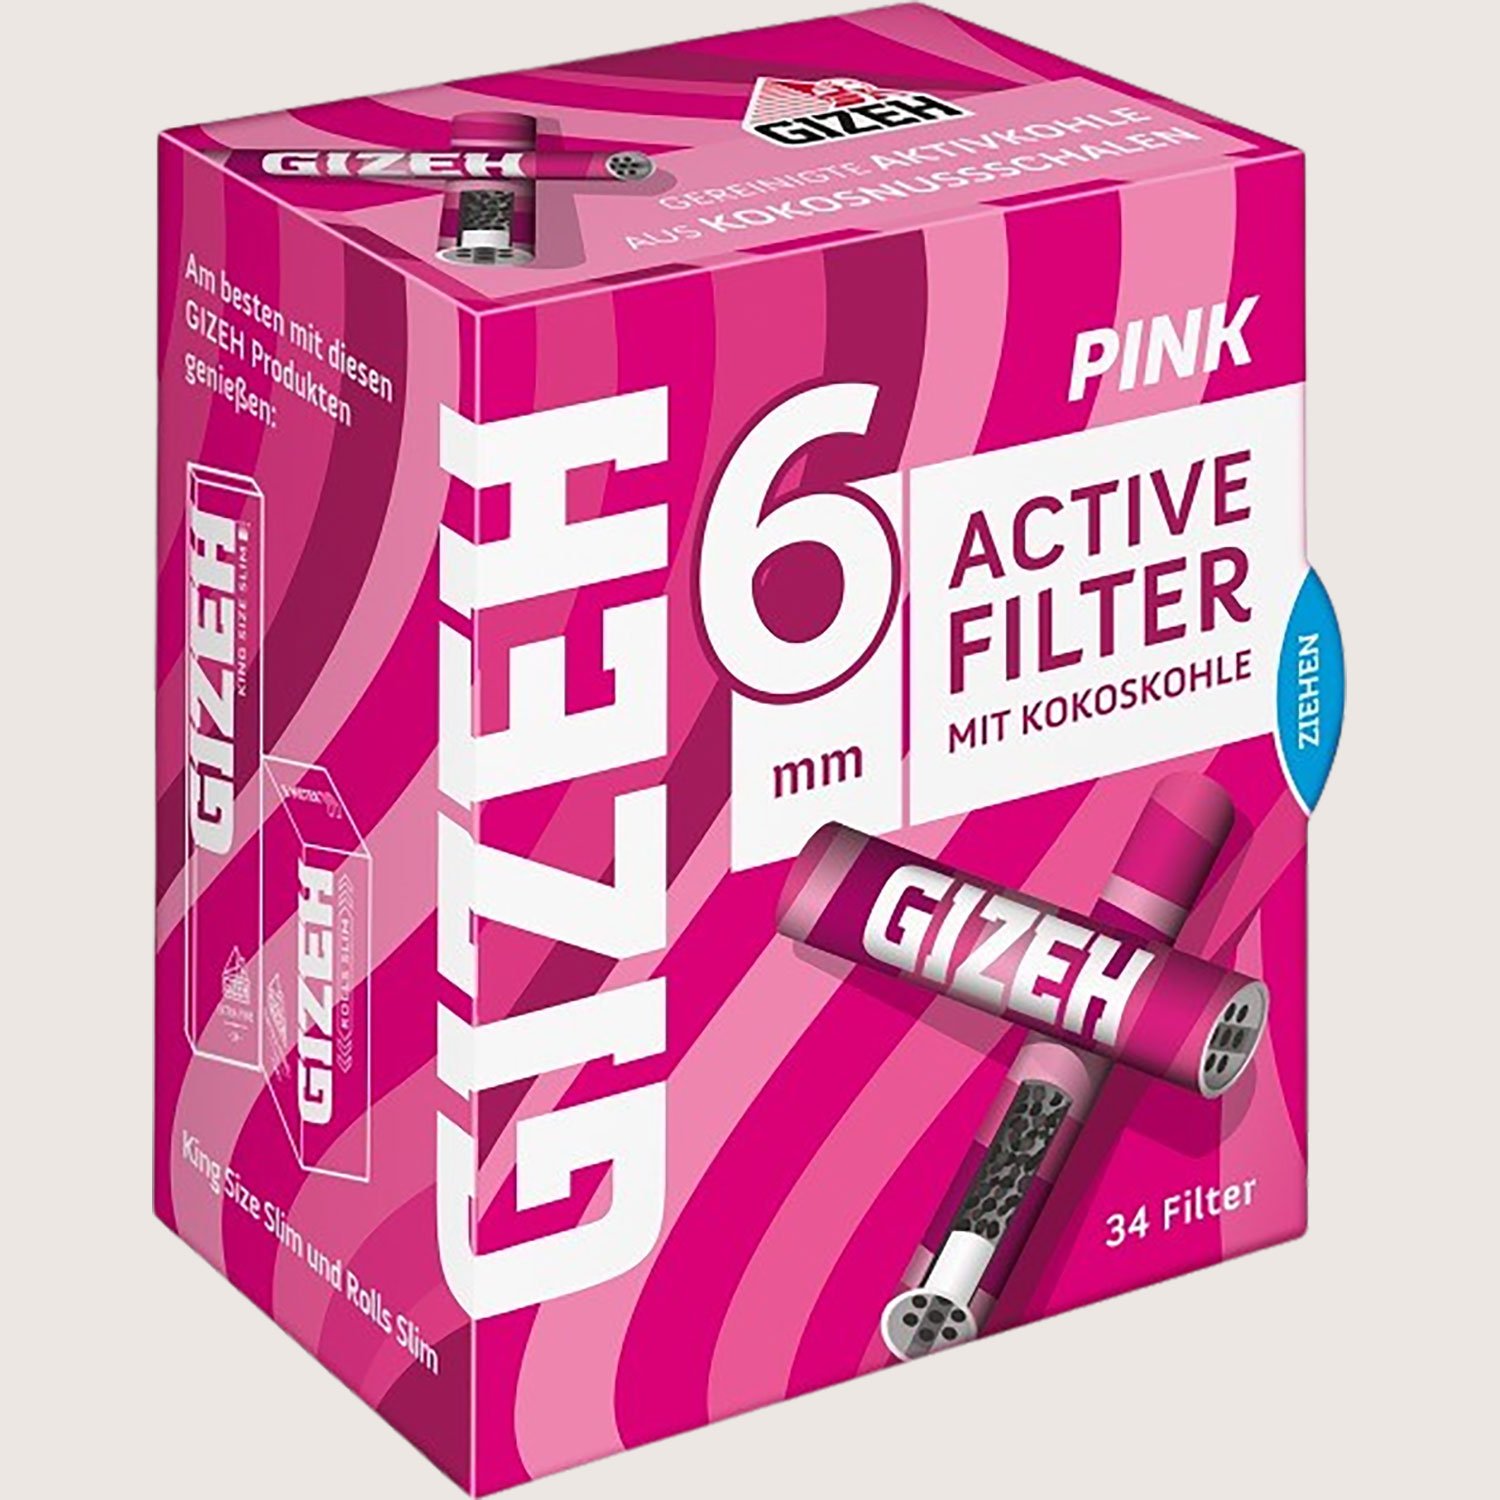 Gizeh Pink Active Filter 6 mm 34 Filter